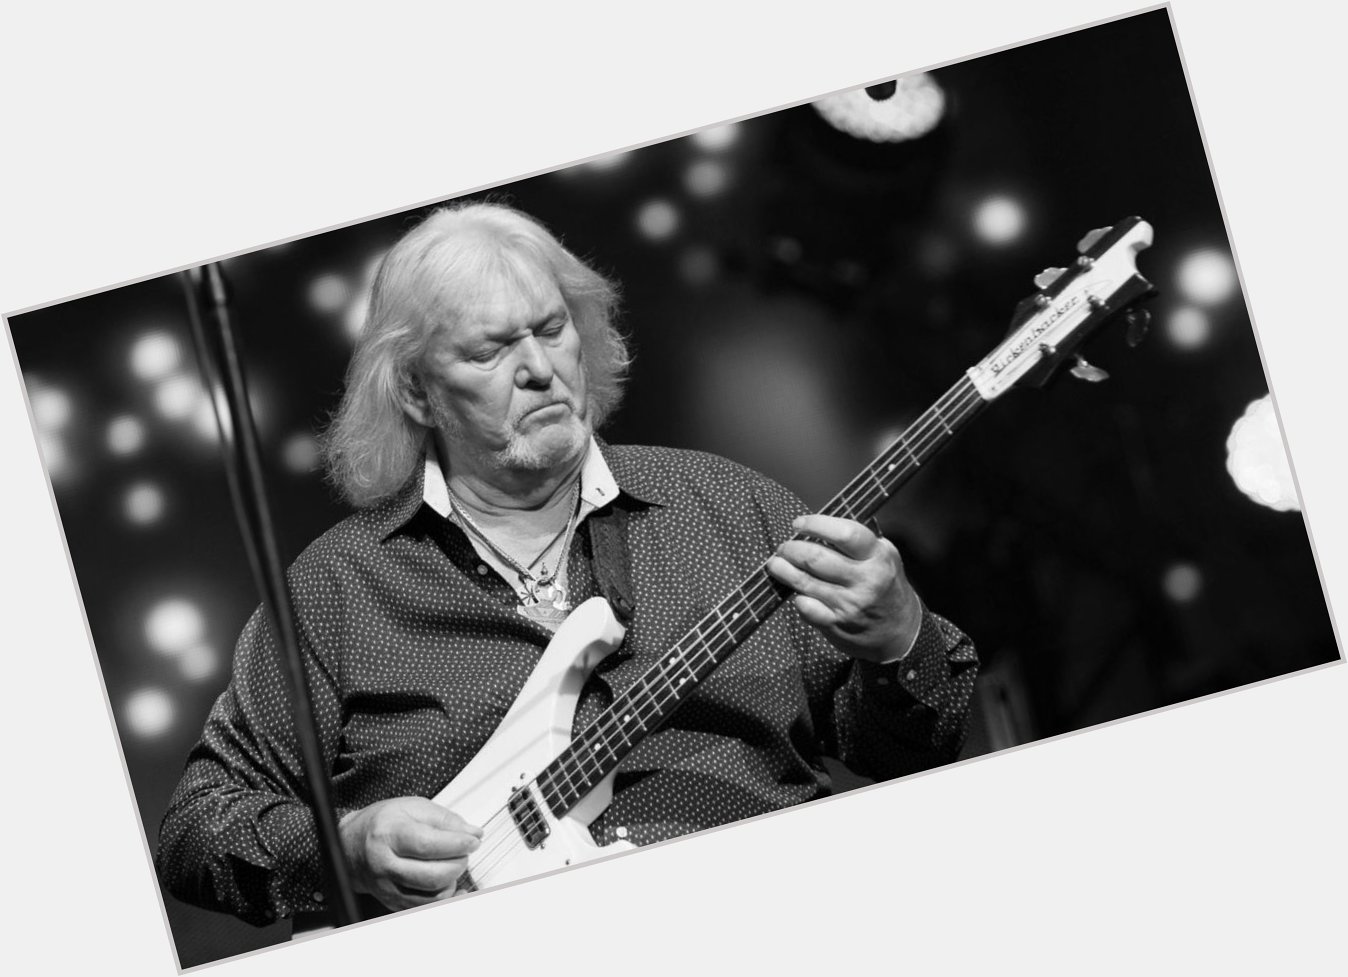 Happy birthday to the late Chris Squire, who was born on this day in 1948 